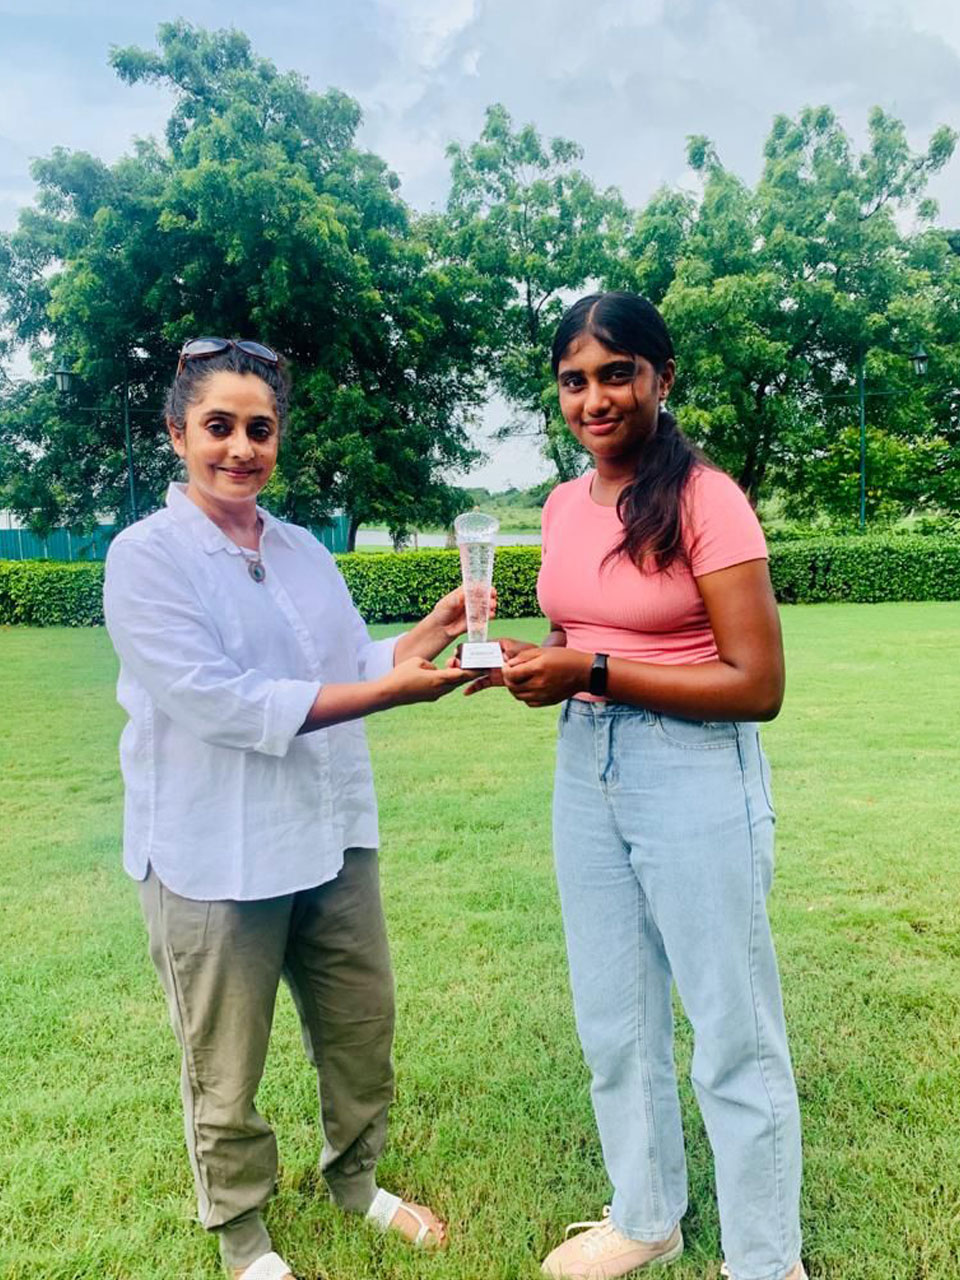 Another great performance by Keerthana Rajeev at the Western India Ladies and Junior Girls at Kalhaar Blues and Greens Golf Club,